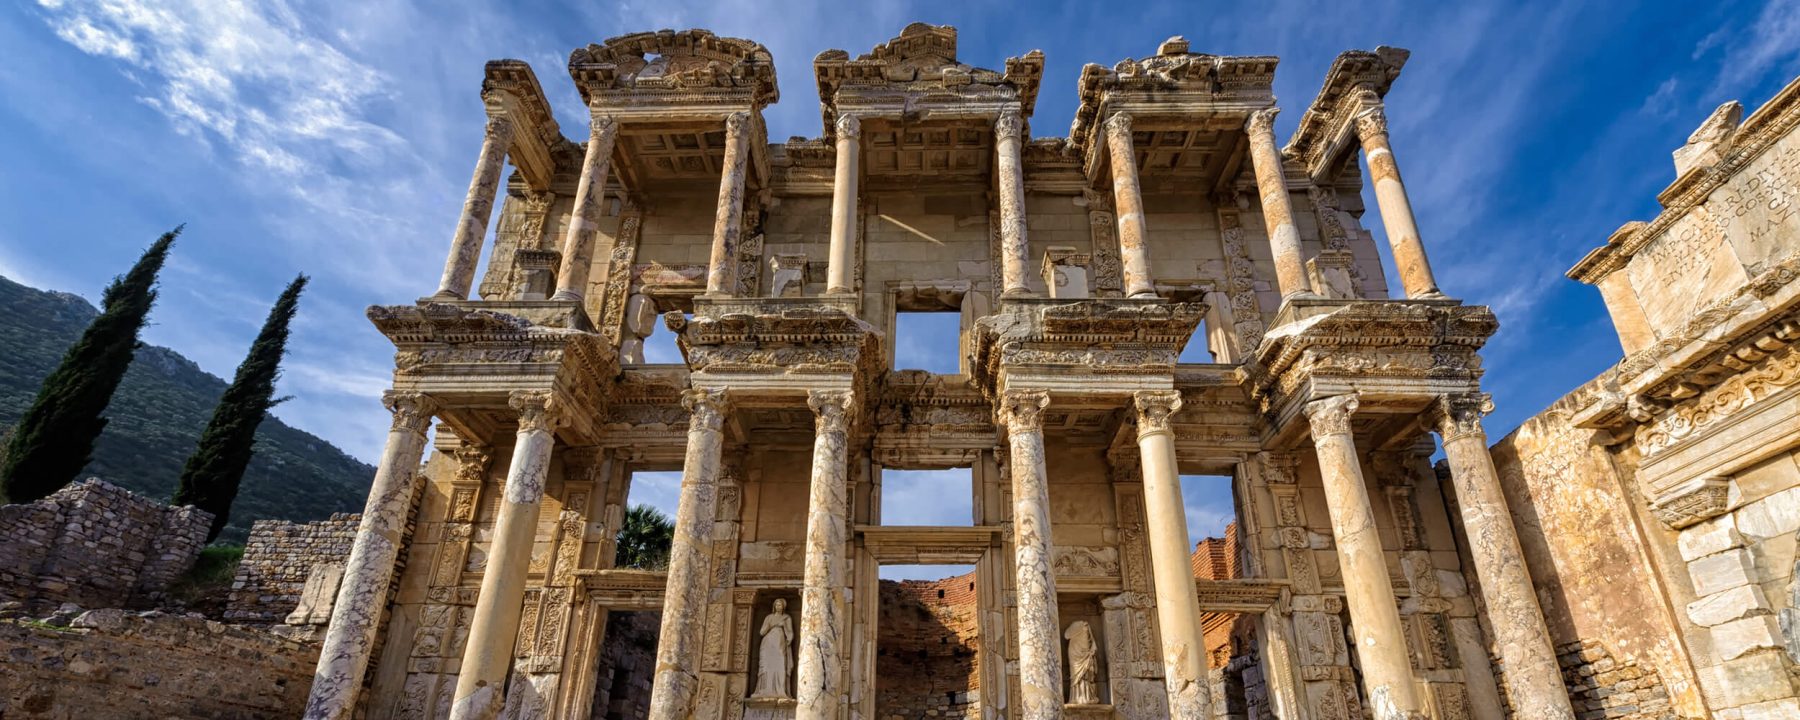 The Library of Celsus in Ephesus, Anatolia